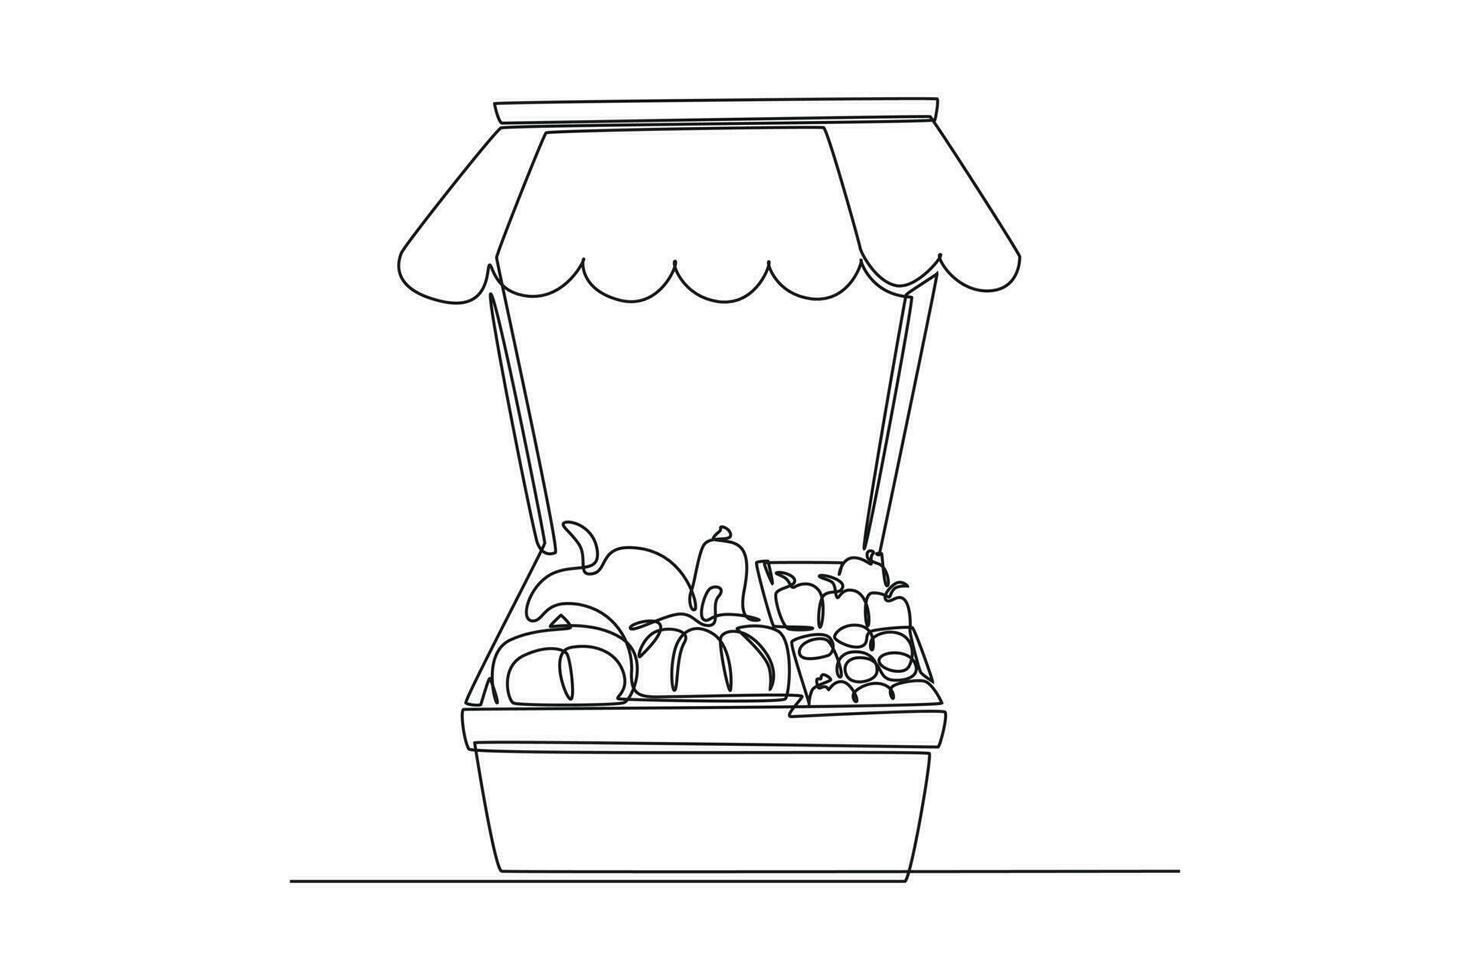 Sketch Thai Local Market Place In Chiangmai Free Hand Draw Vector  Illustration Royalty Free SVG Cliparts Vectors and Stock Illustration  Image 74390059